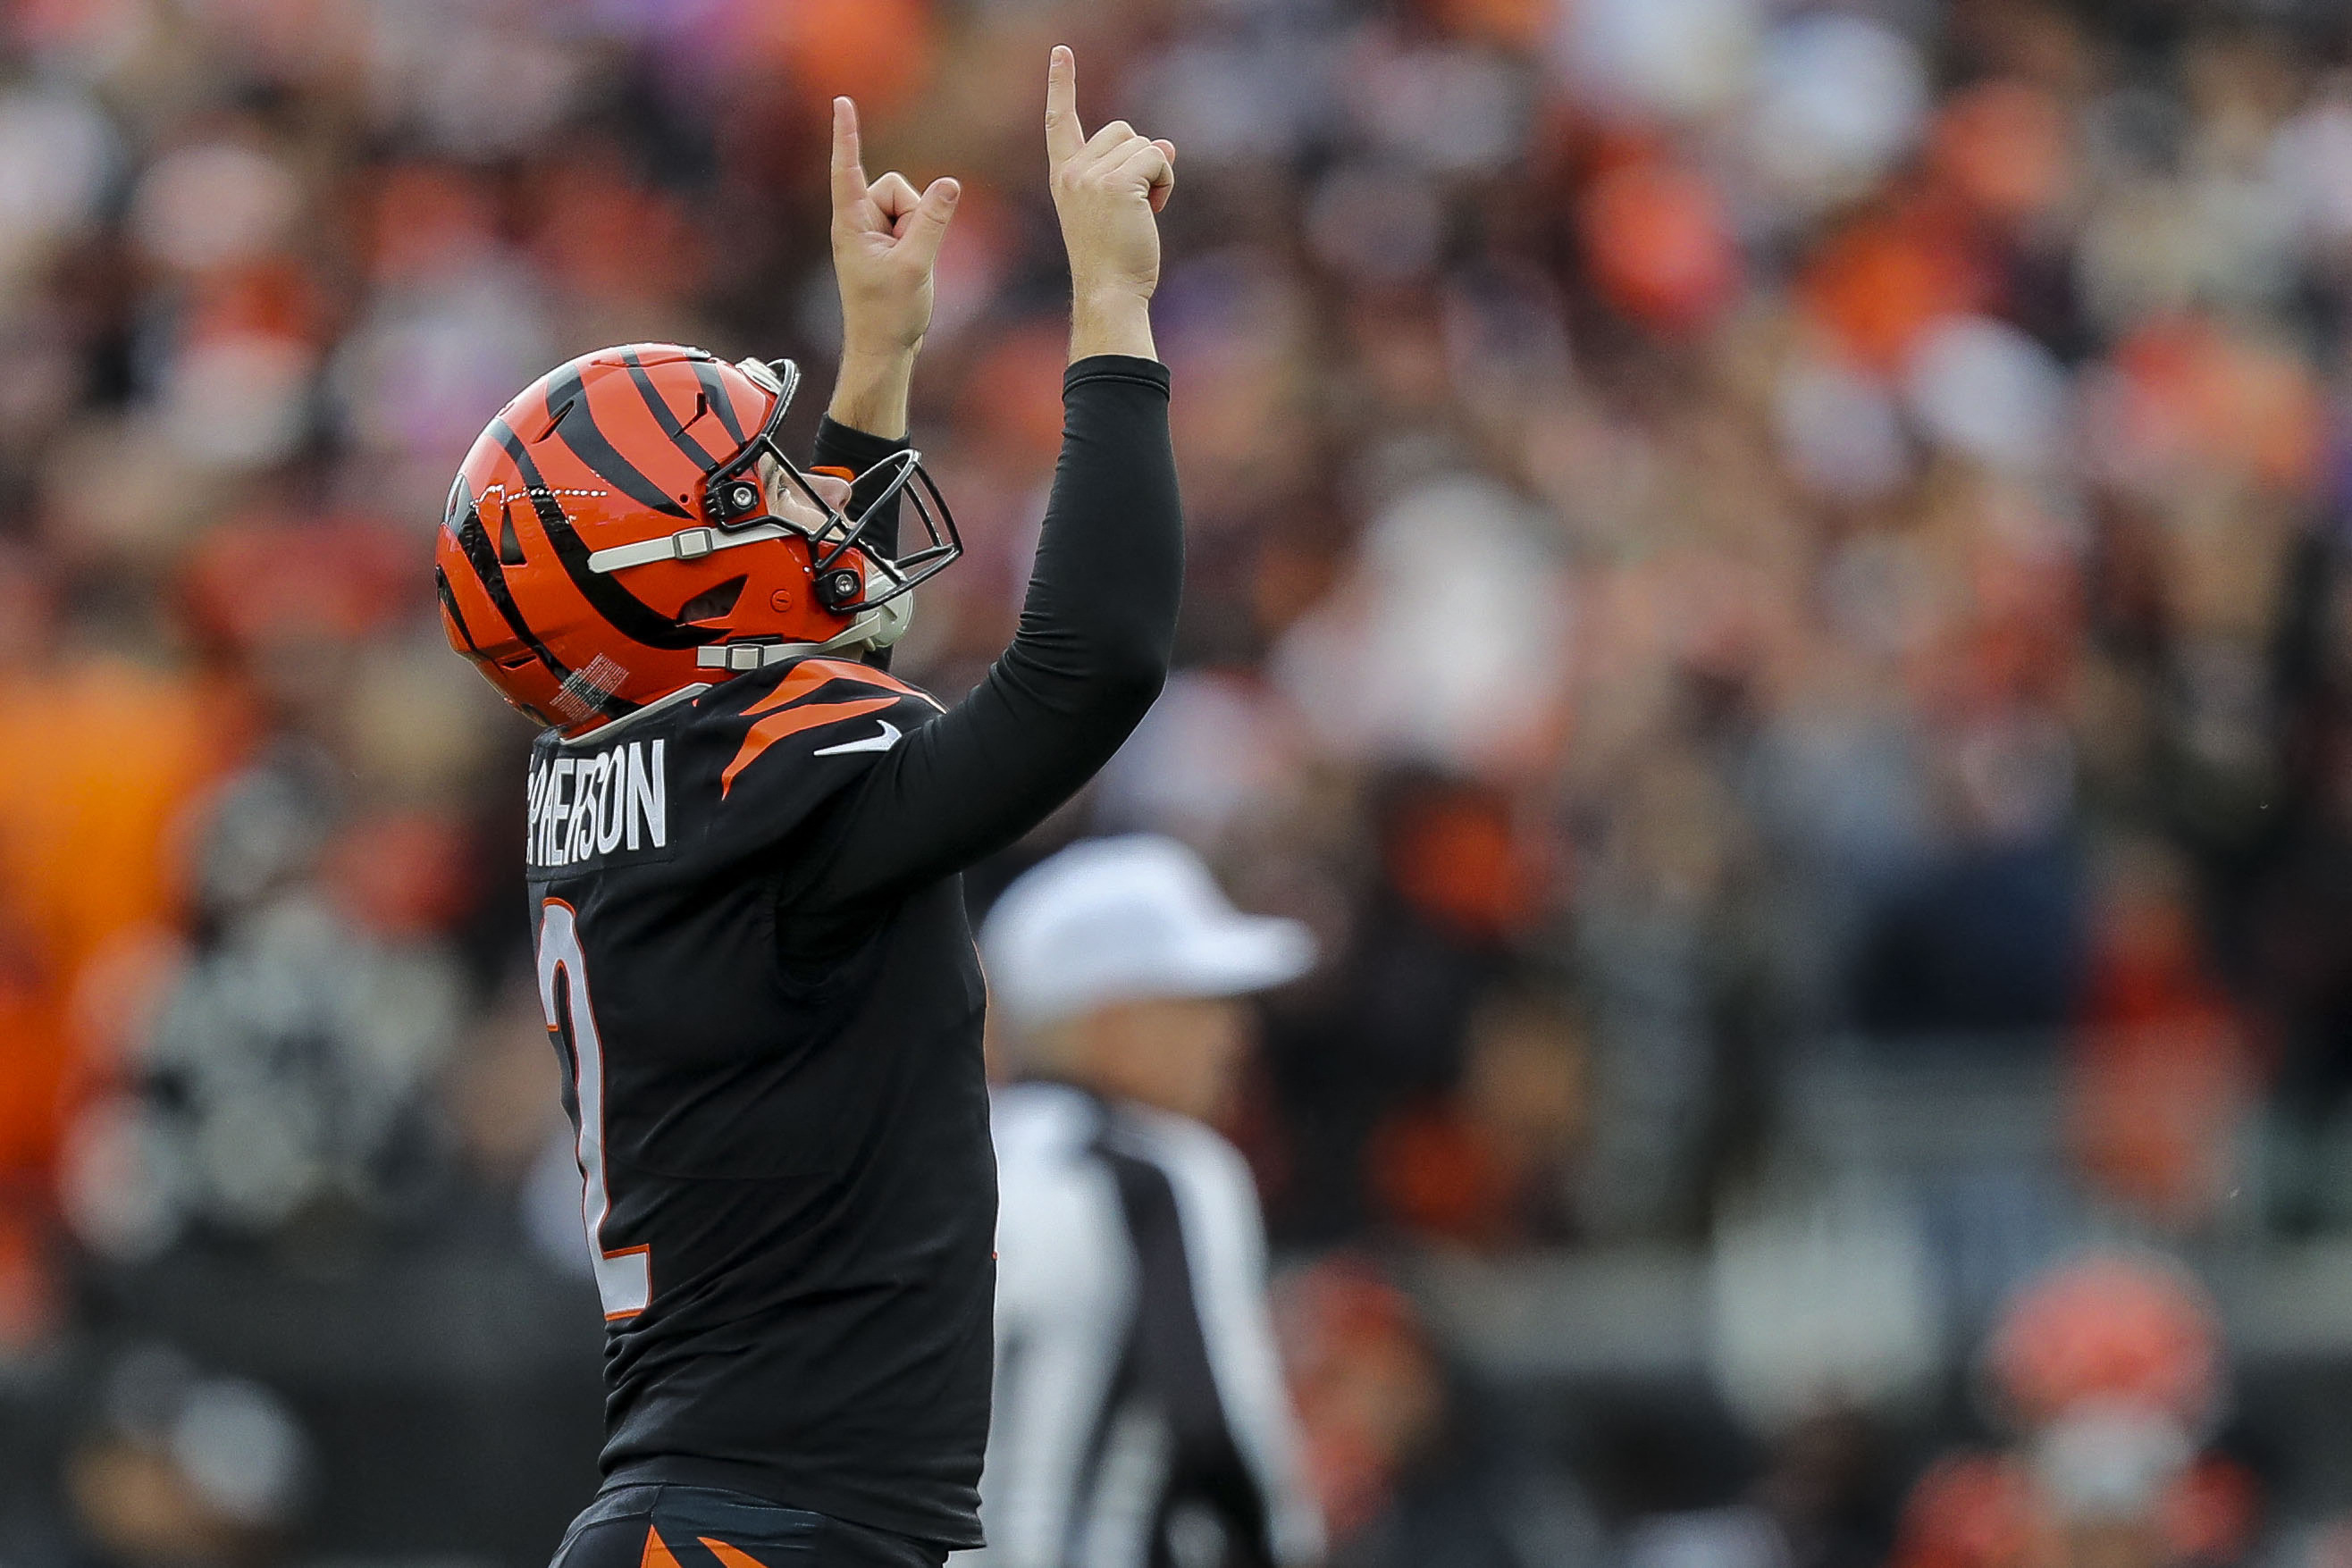 Jake Browning shines again for Bengals, rallying them to 27-24 overtime win  over Vikings